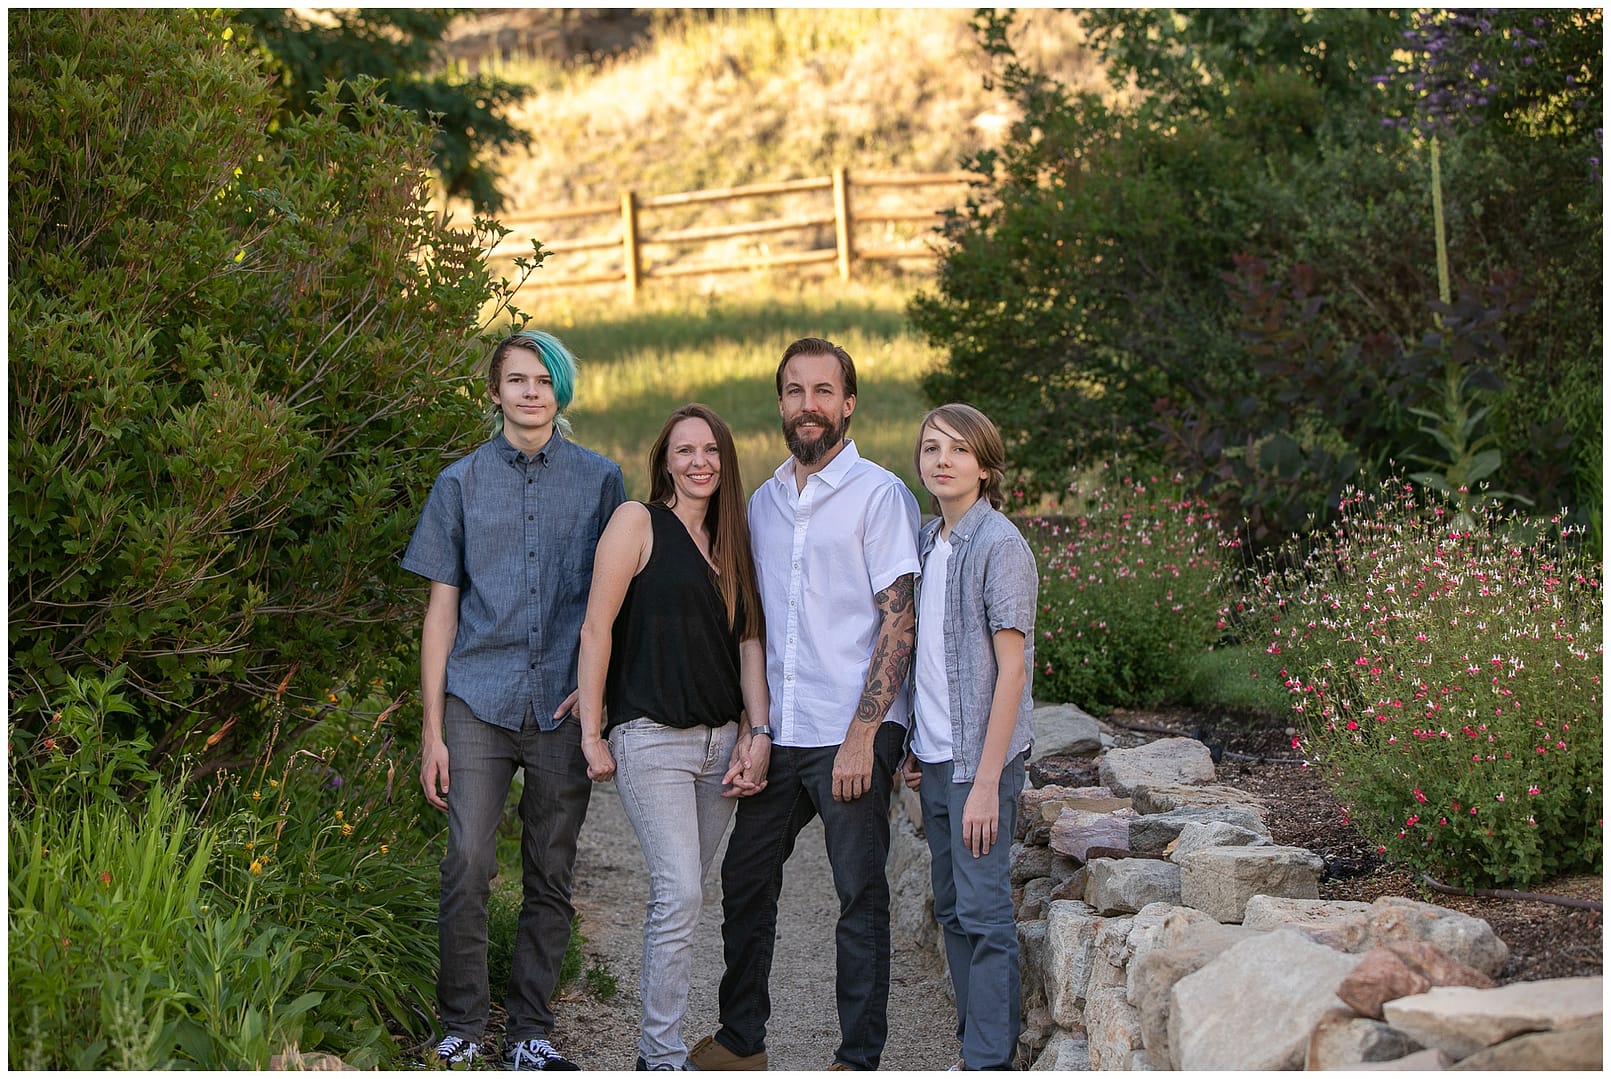 Boise family poses for photograph. Photo by Tiffany Hix.